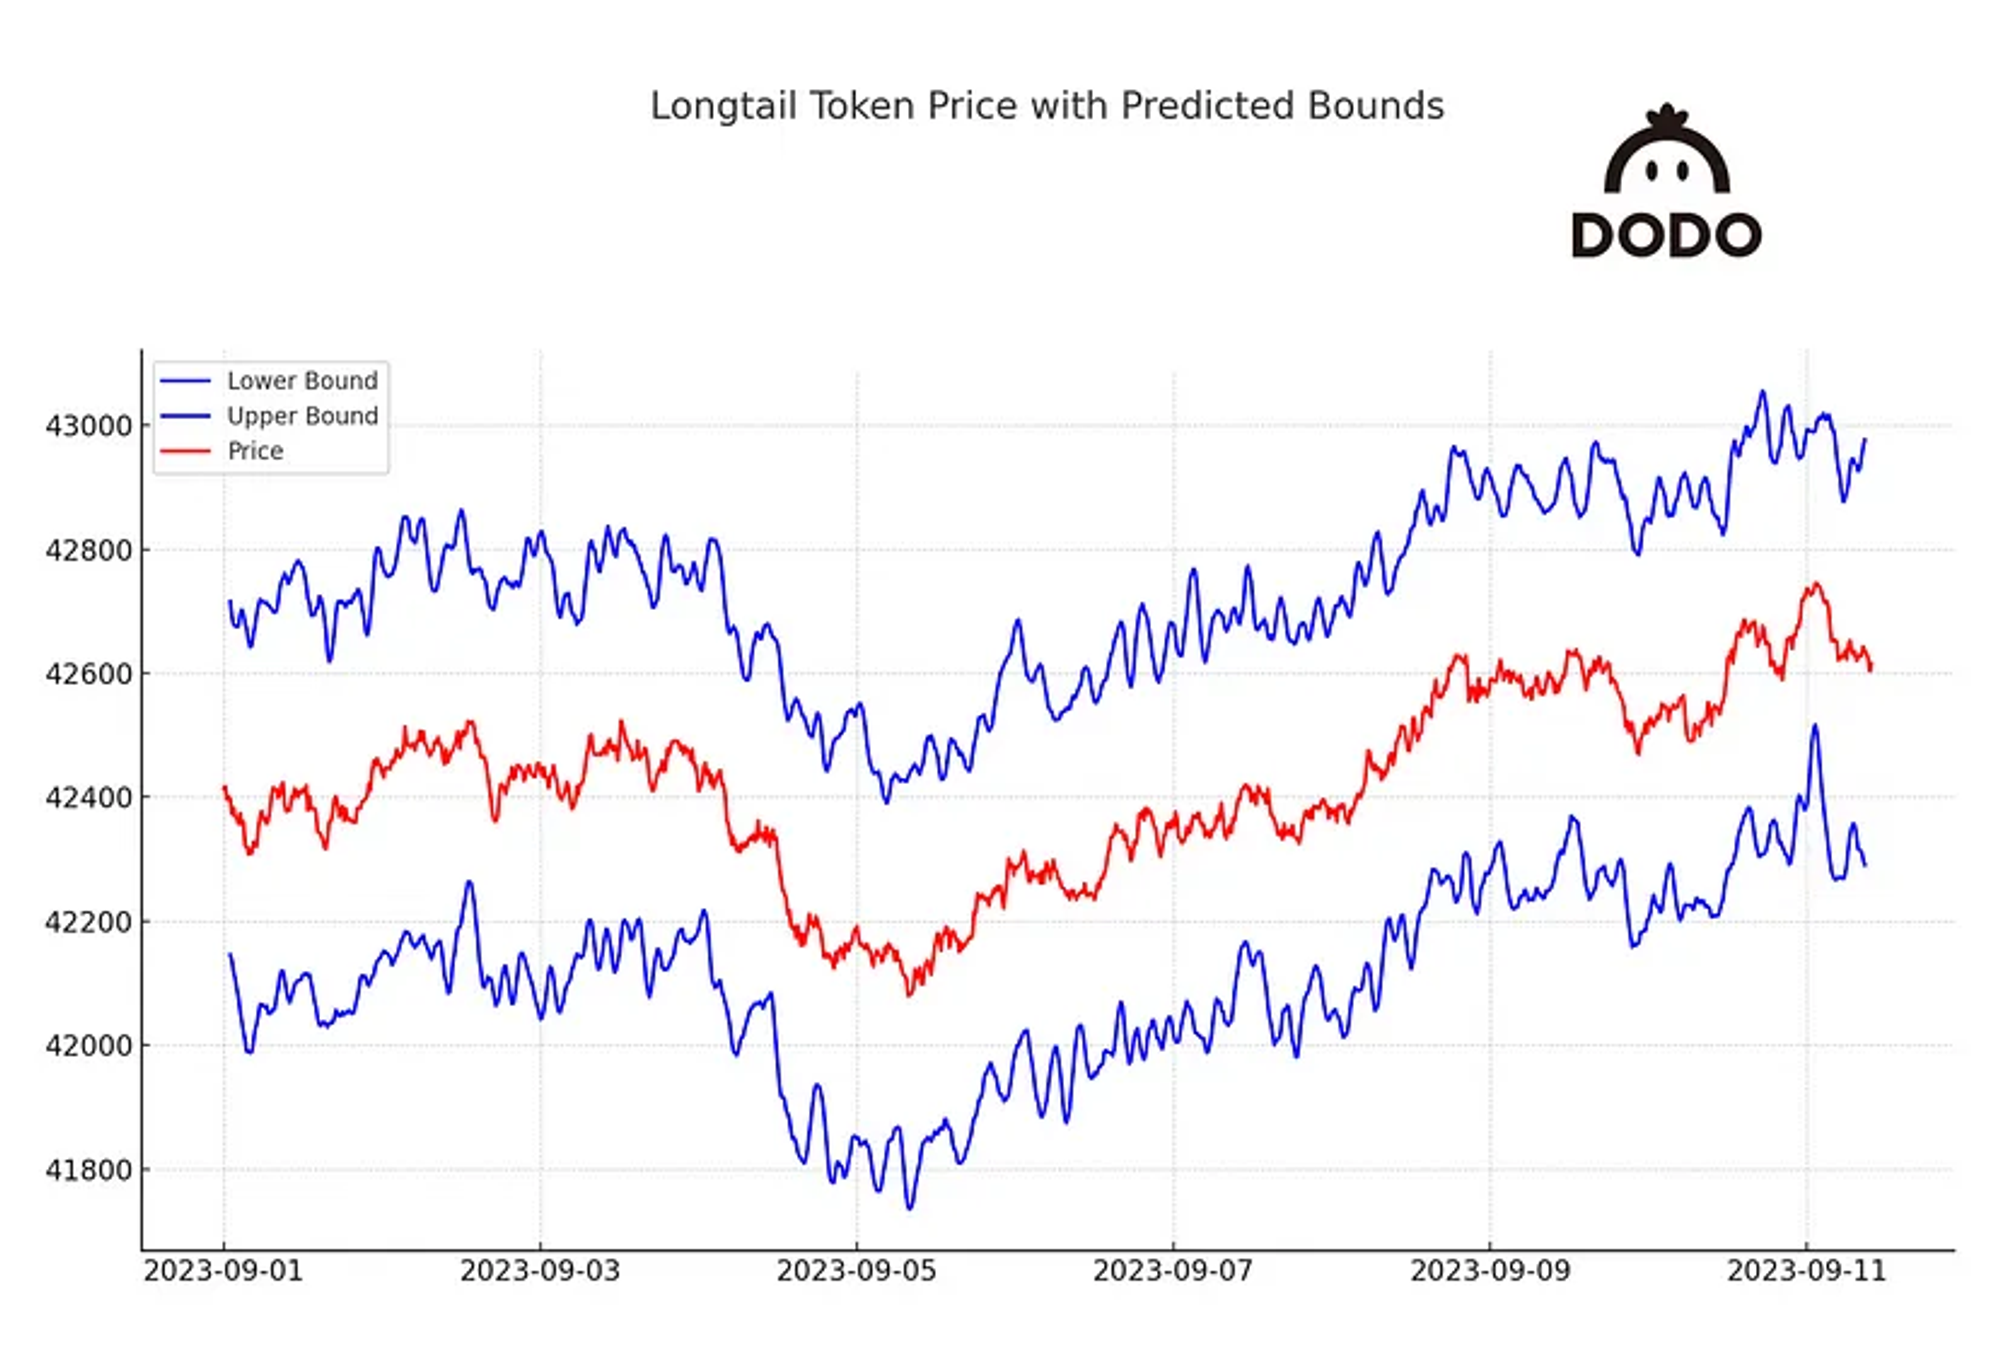 Dynamic Slippage Illustration: Price Prediction vs. Actual Trends of Long-tail Coins During Market Fluctuations, Source: @DODO.